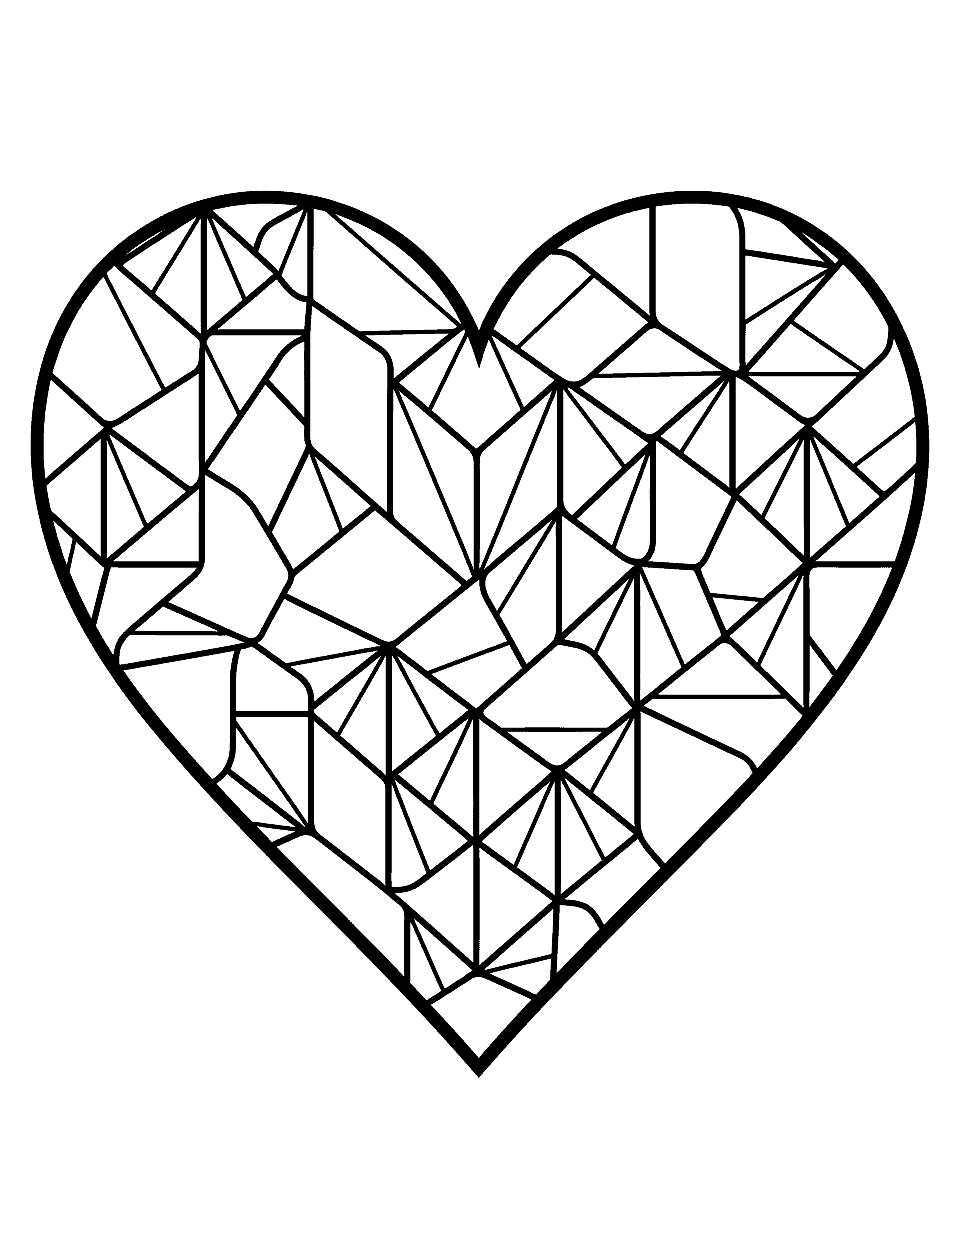 Geometric Heart Coloring Page - A heart constructed from geometric shapes like triangles and squares.